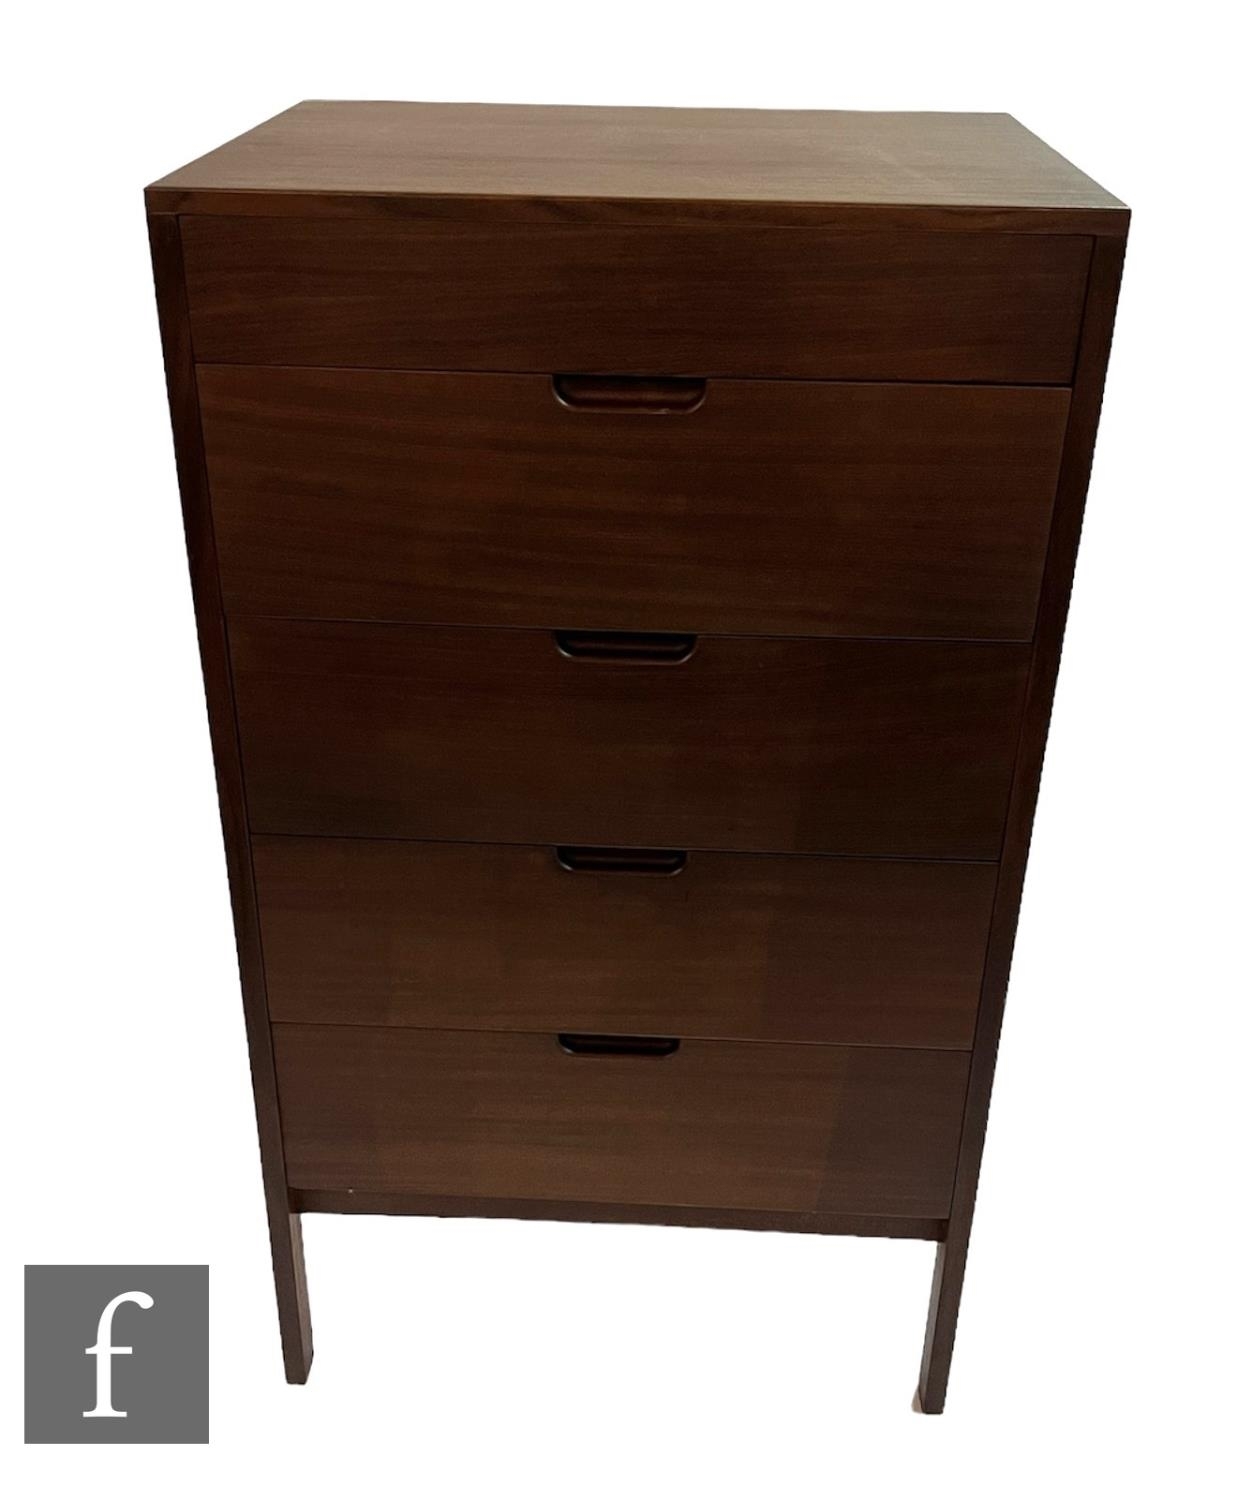 Richard Hornby - Fyne Ladye Furniture - A teak chest of five drawers with recessed handles by Richard Hornby